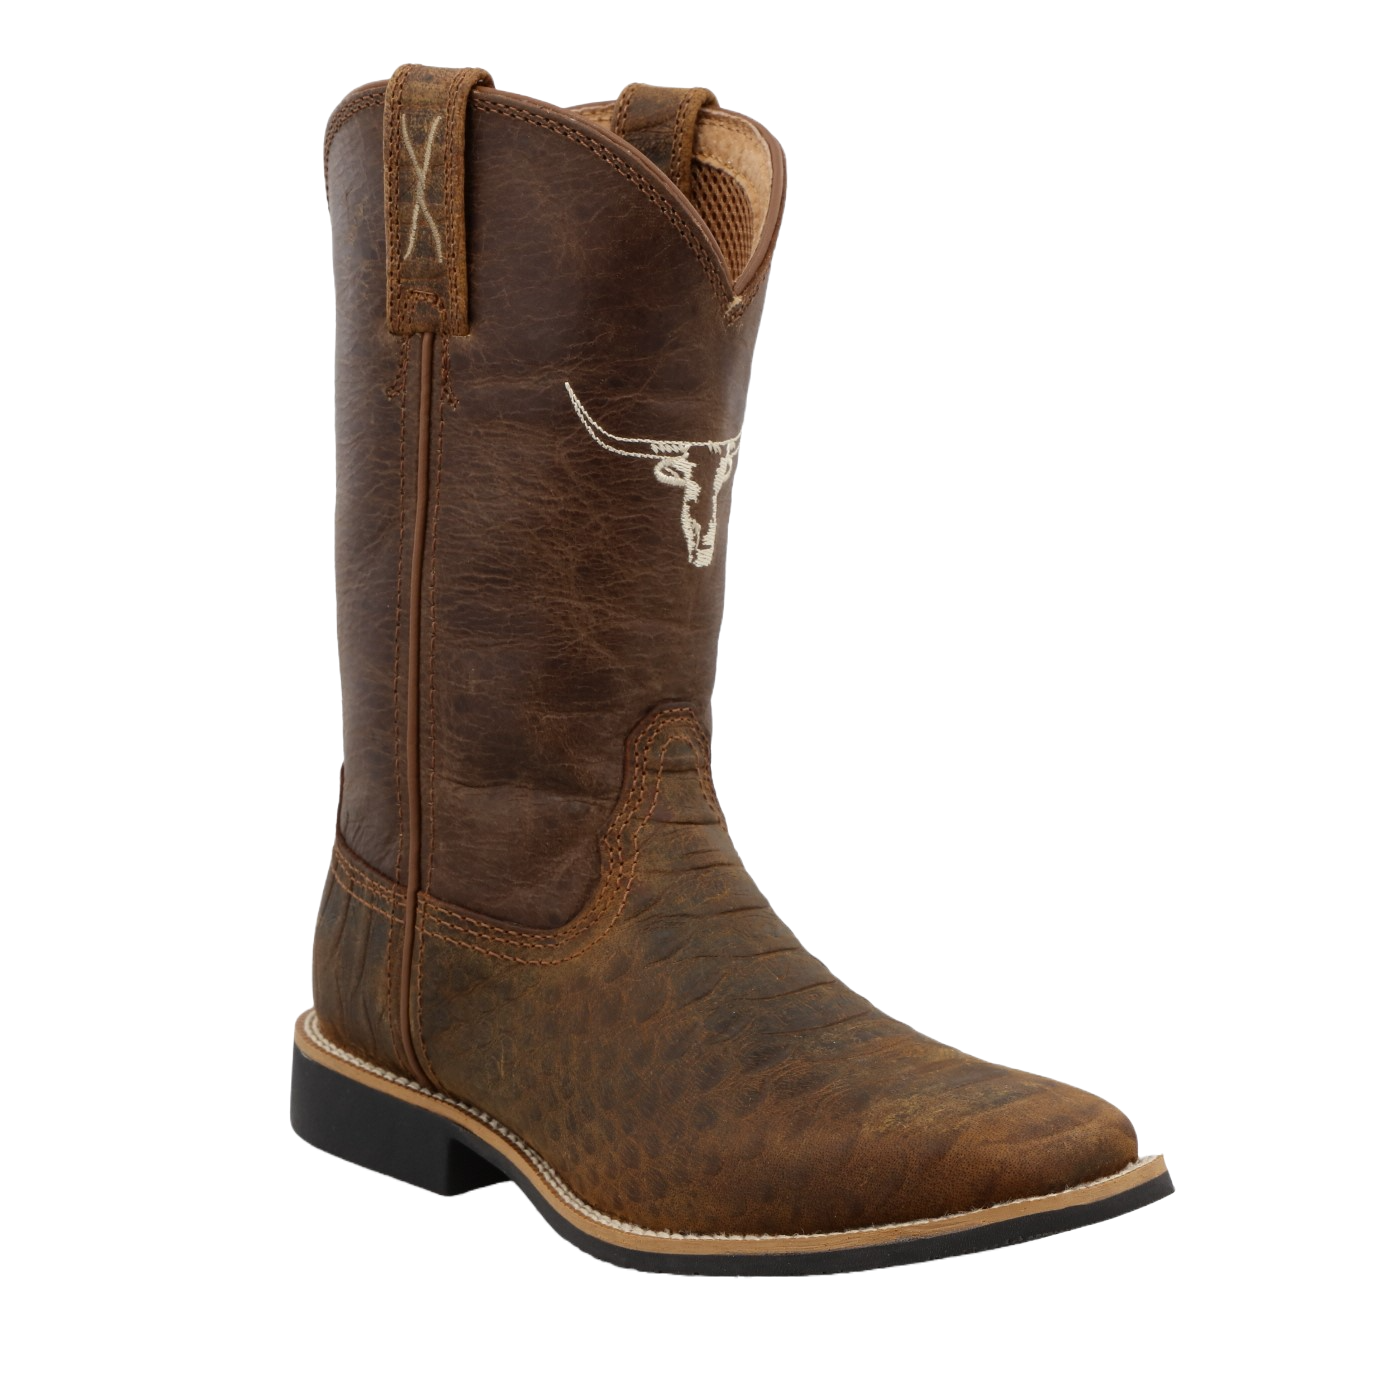 Twisted X Children's Top Hand Tan & Chocolate Square Toe Boots YTH0016